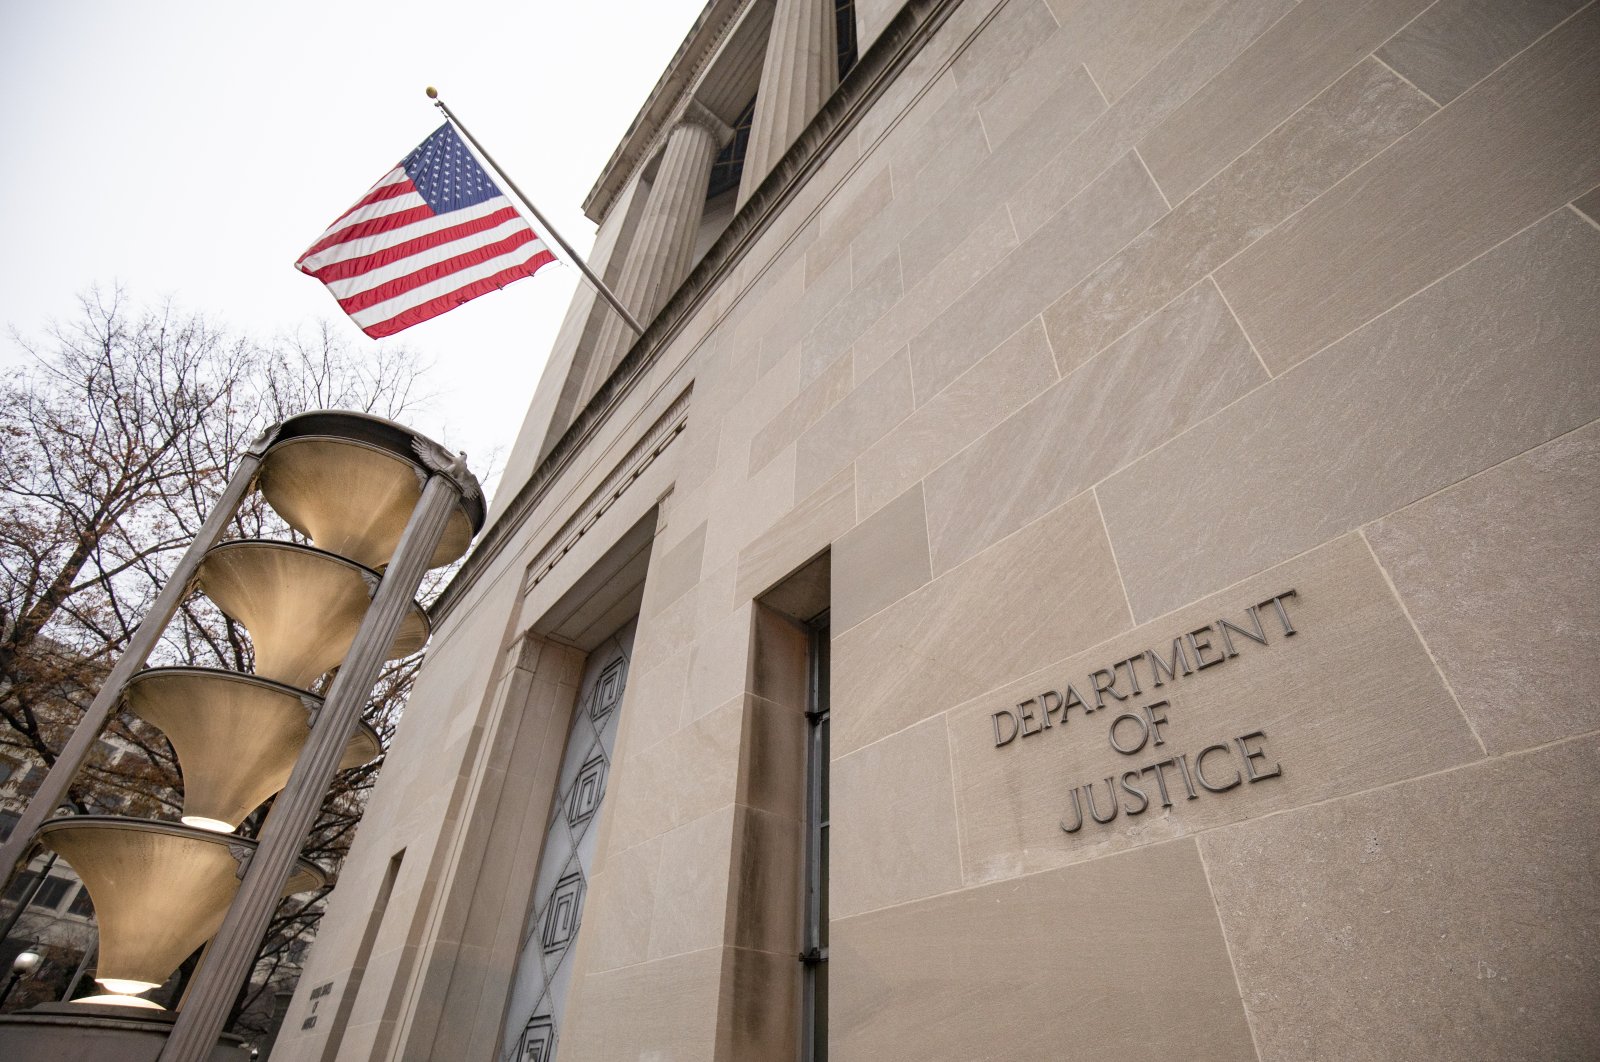 The U.S. Department of Justice building is seen on a foggy morning in Washington, D.C., Dec. 9, 2019. (Photo by Getty Images)